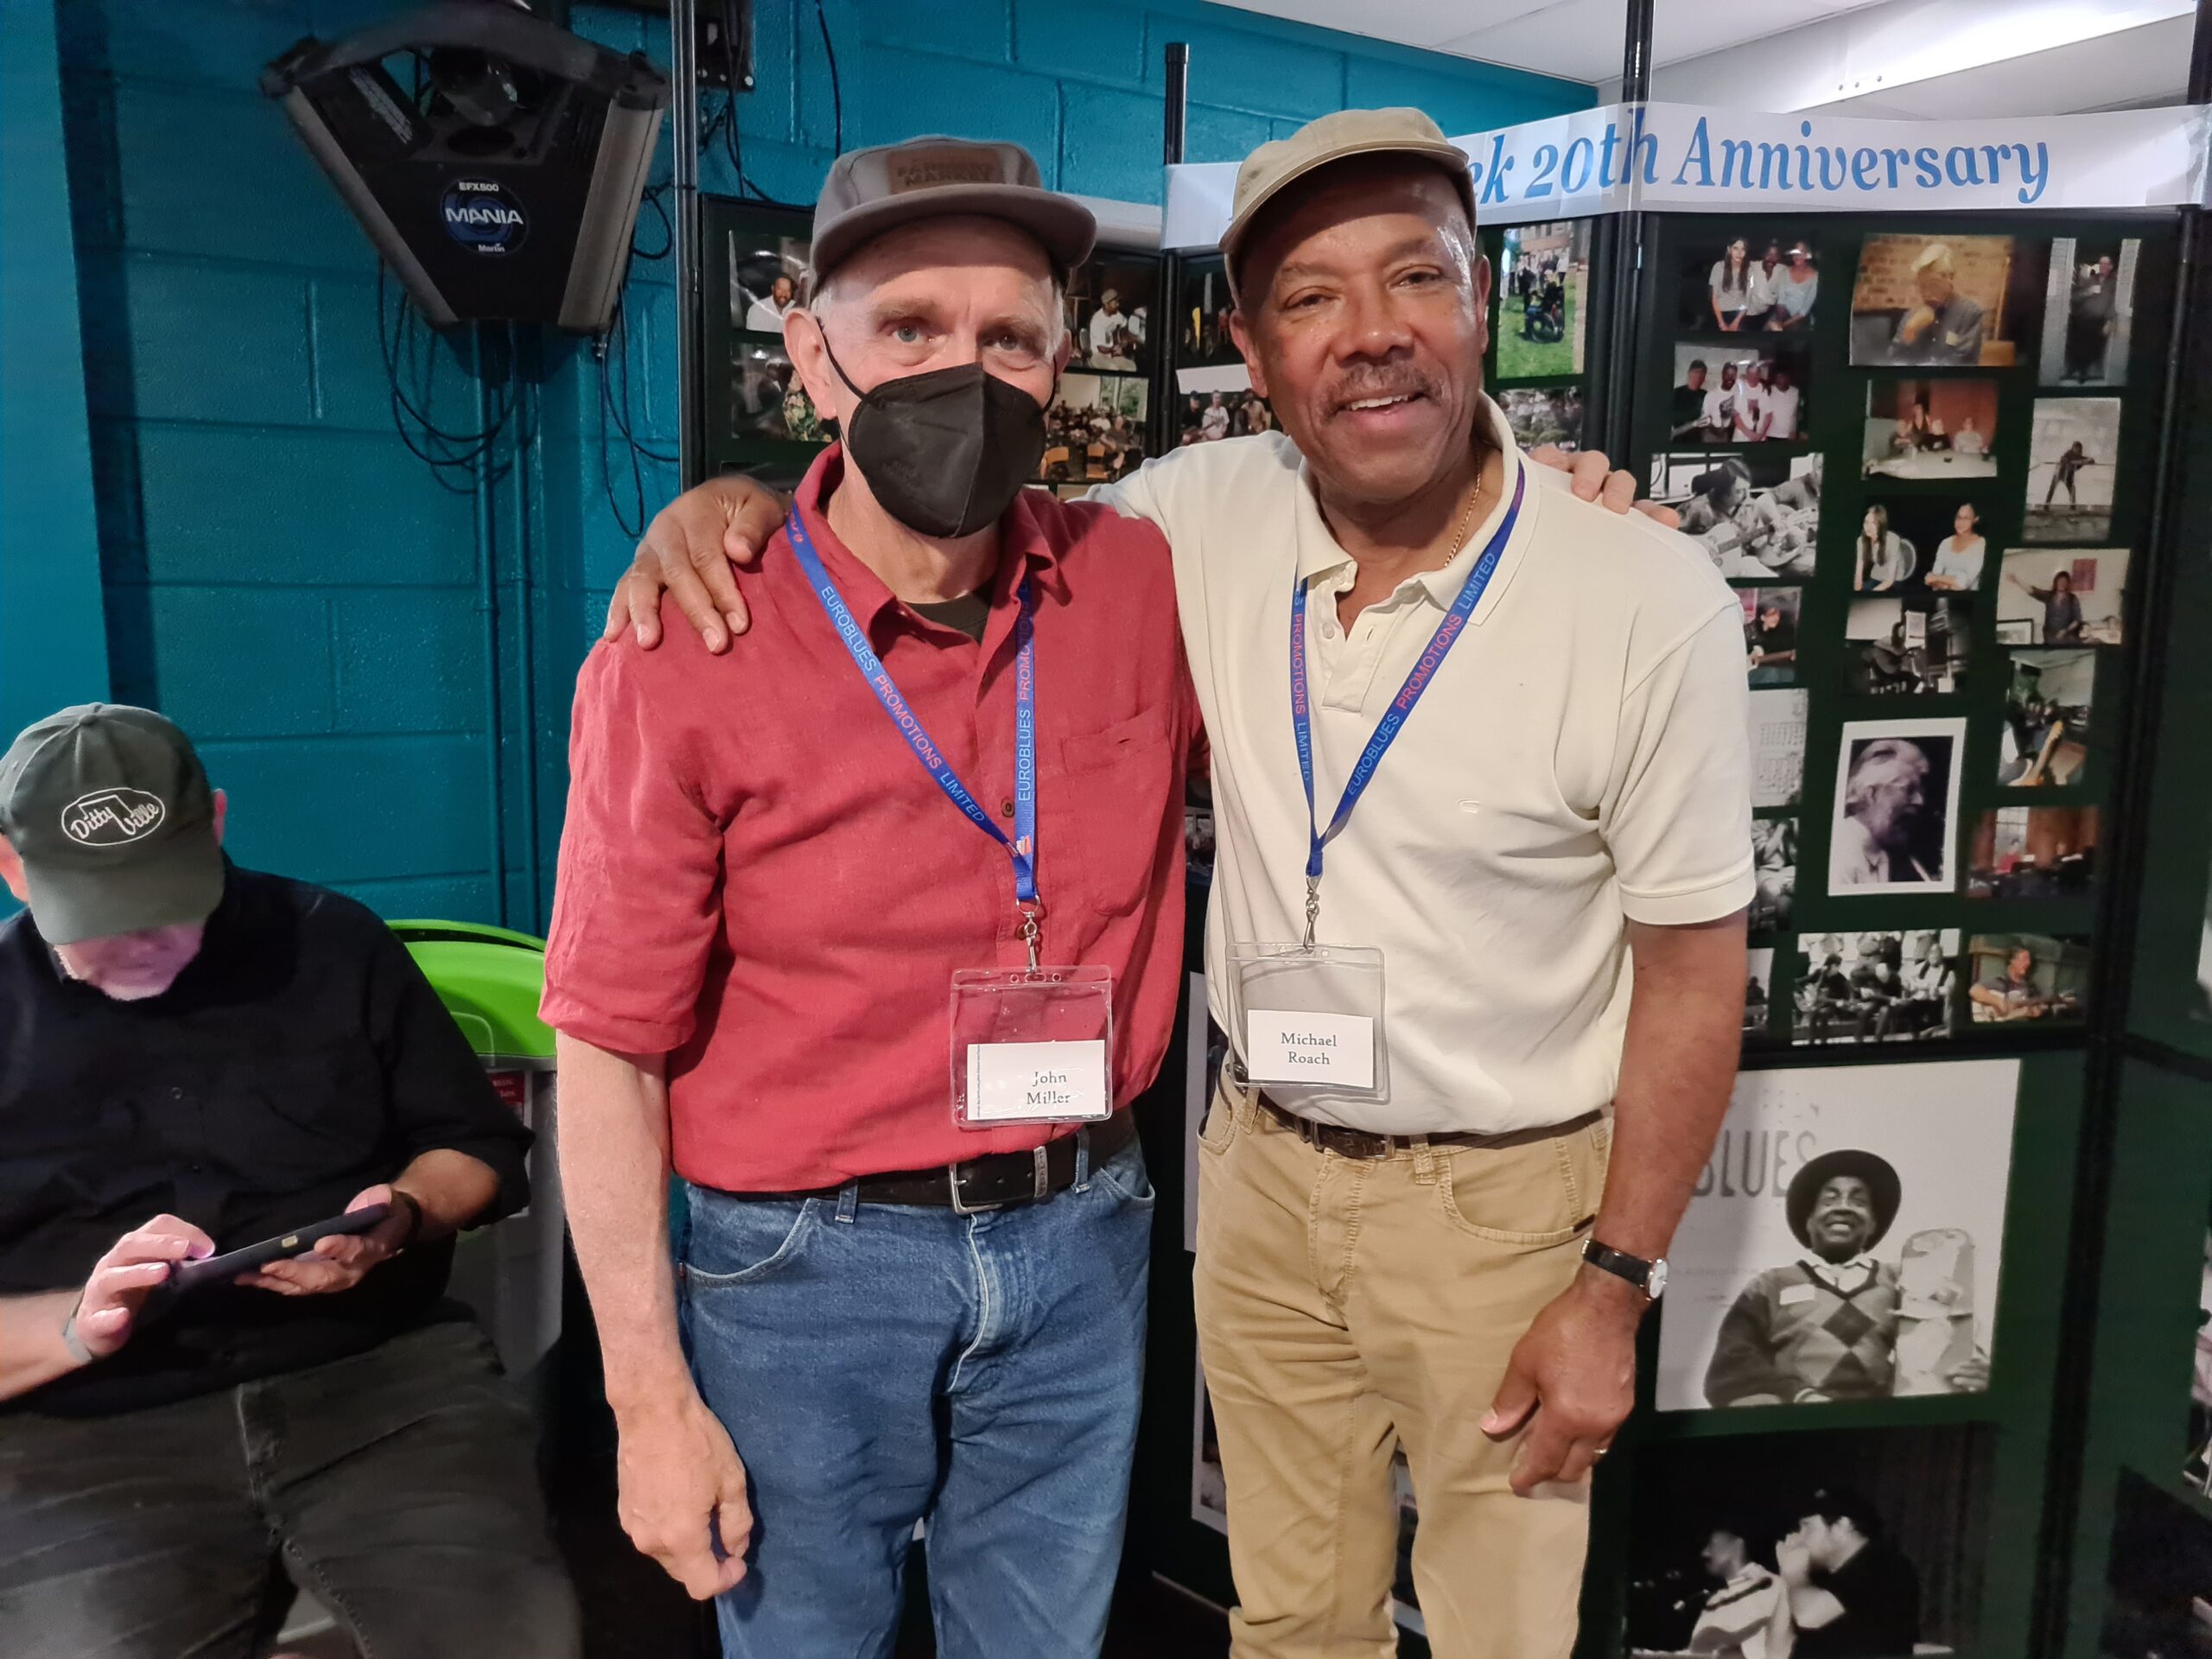 With John Miller at Blues Week 2022 (20th Anniversary), Hartpury College, UK